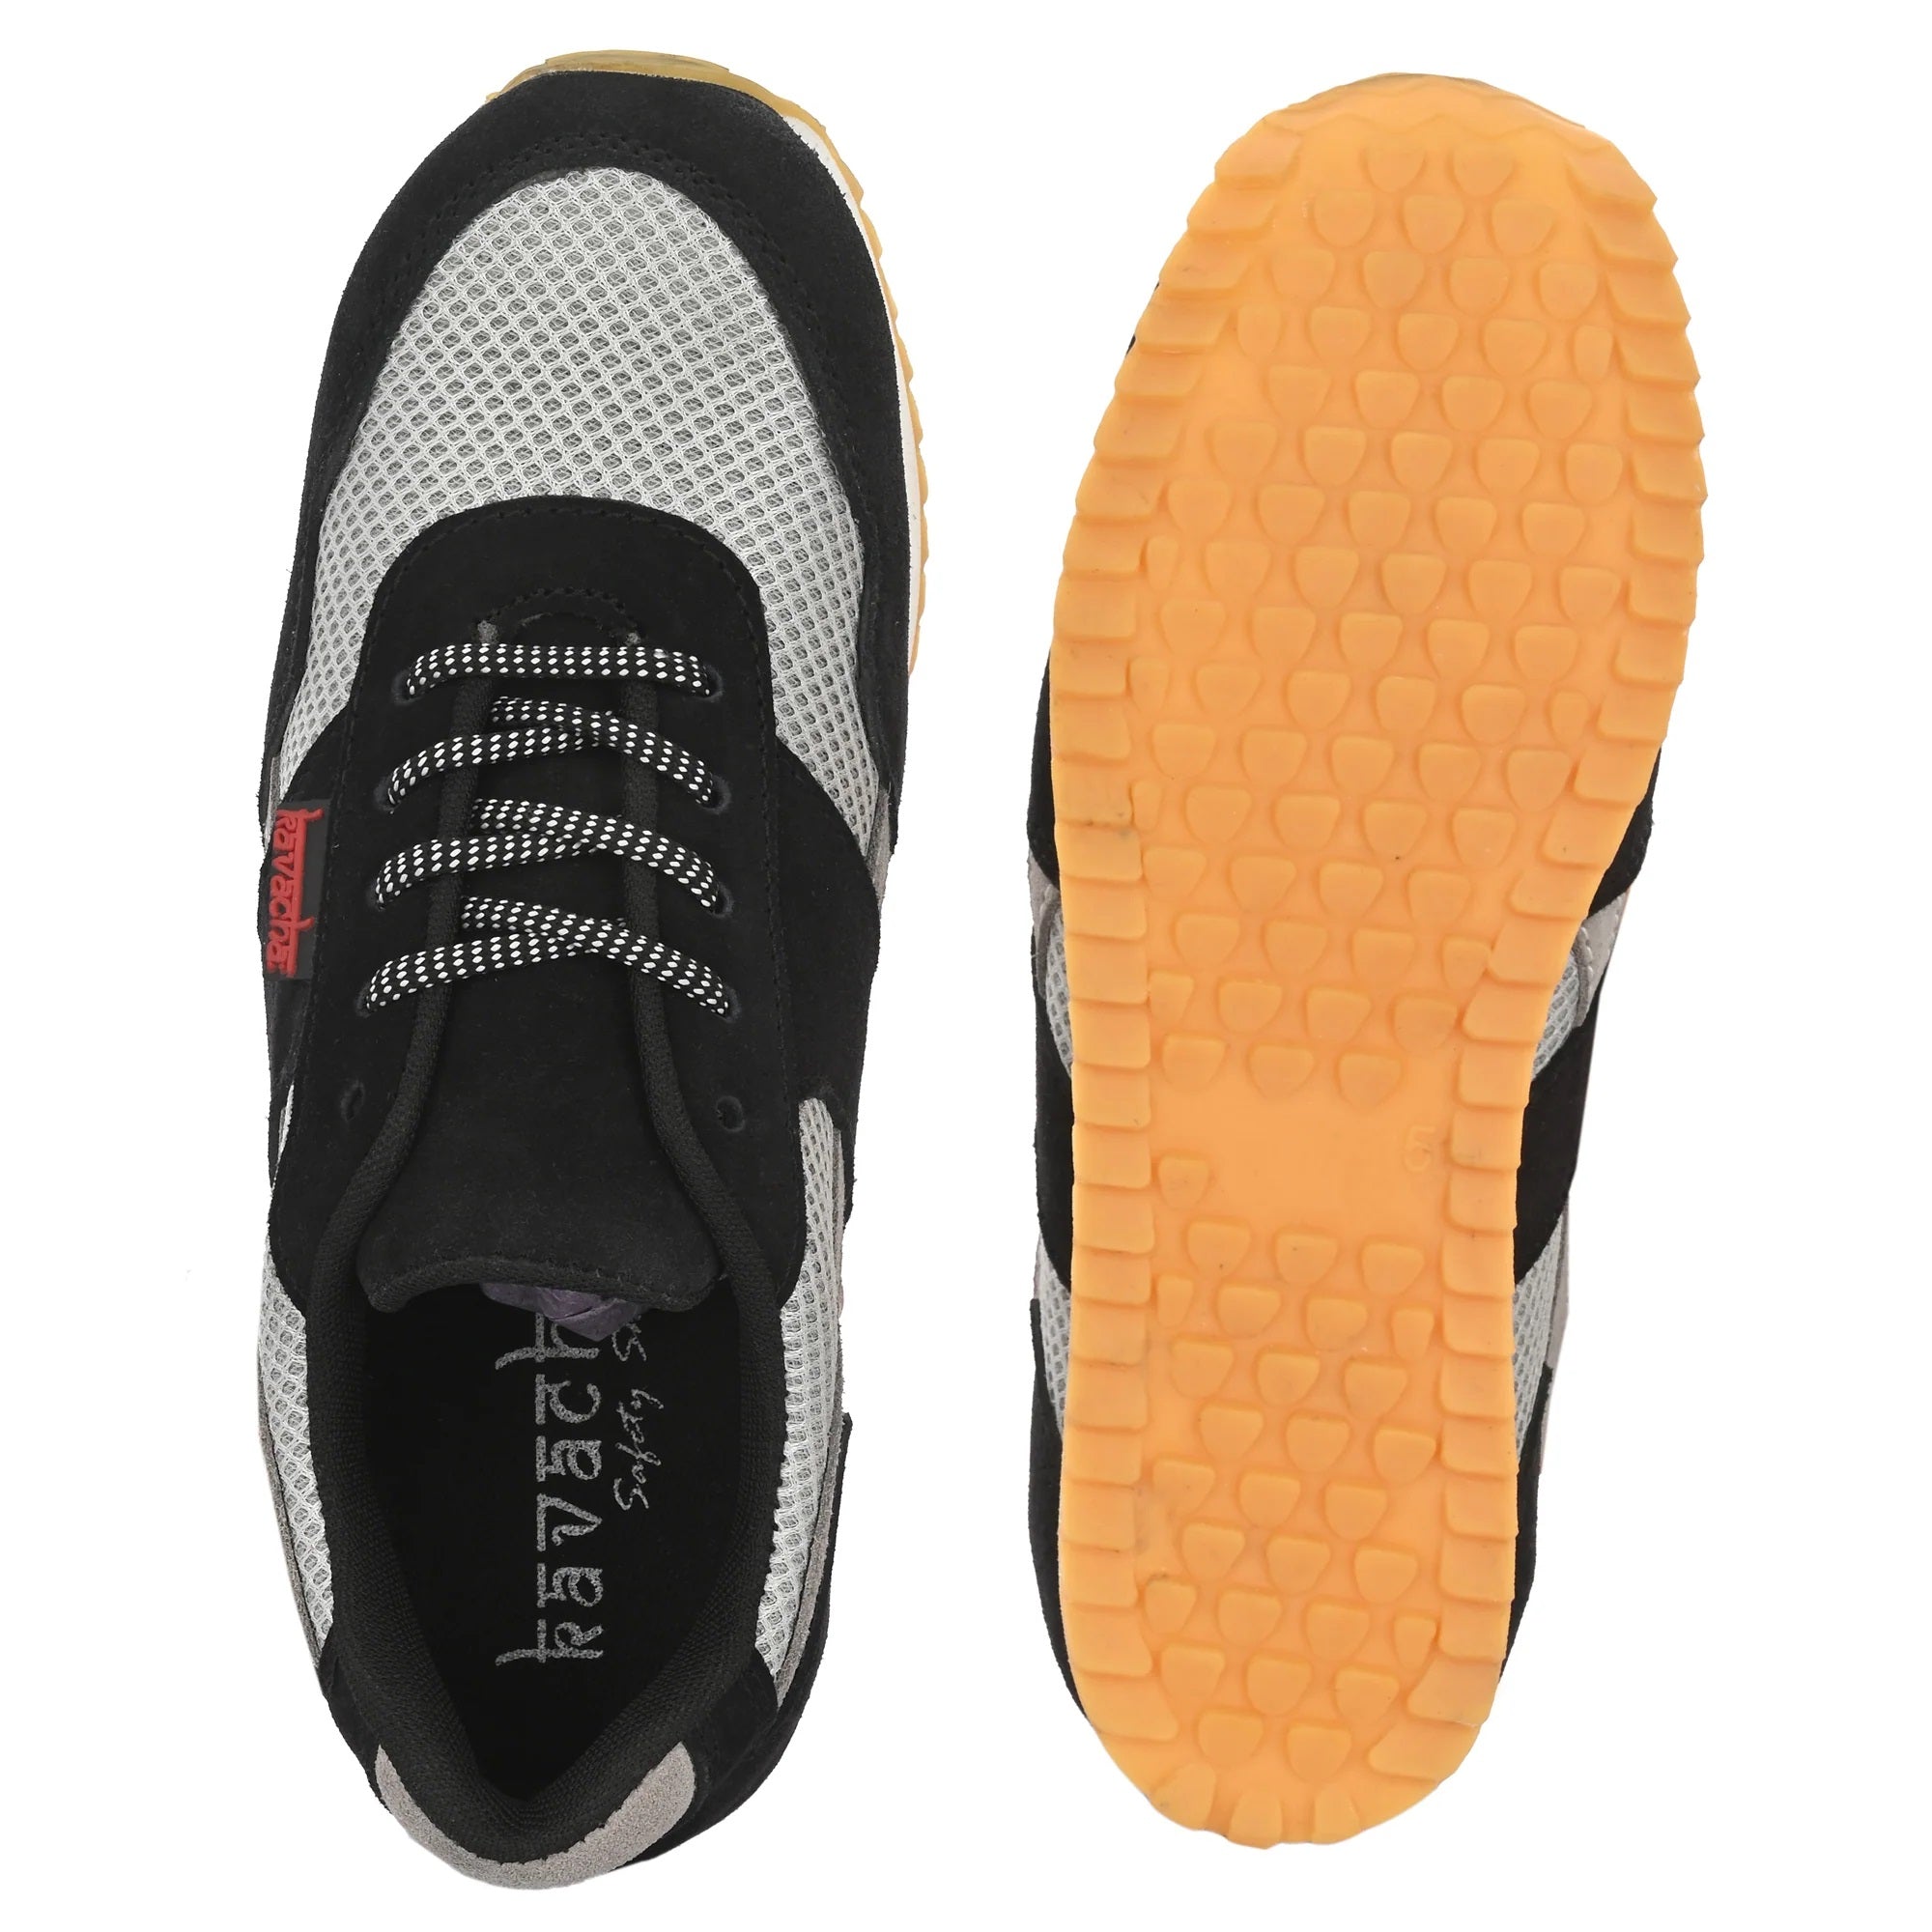 Kavacha Steel Toe with Mesh Upper and Foam Comfort & Phylon TPR Sole Safety Shoe S129